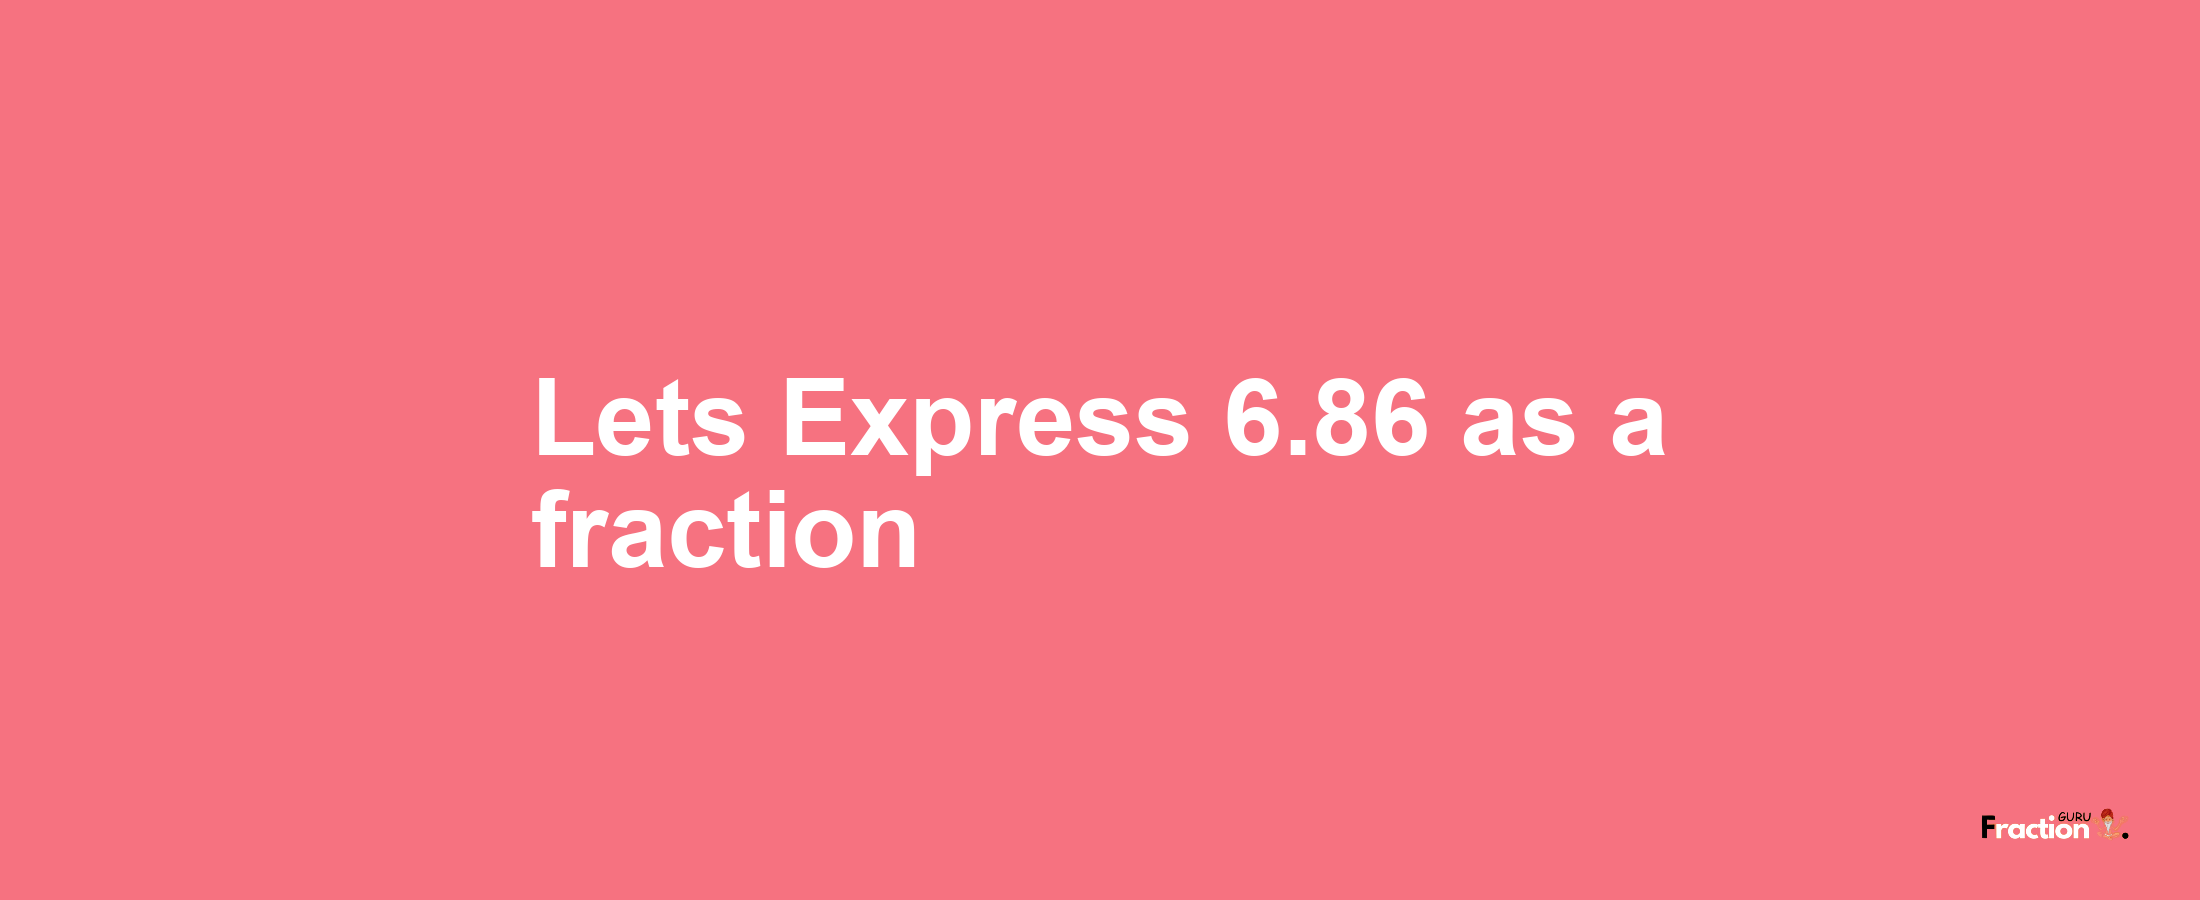 Lets Express 6.86 as afraction